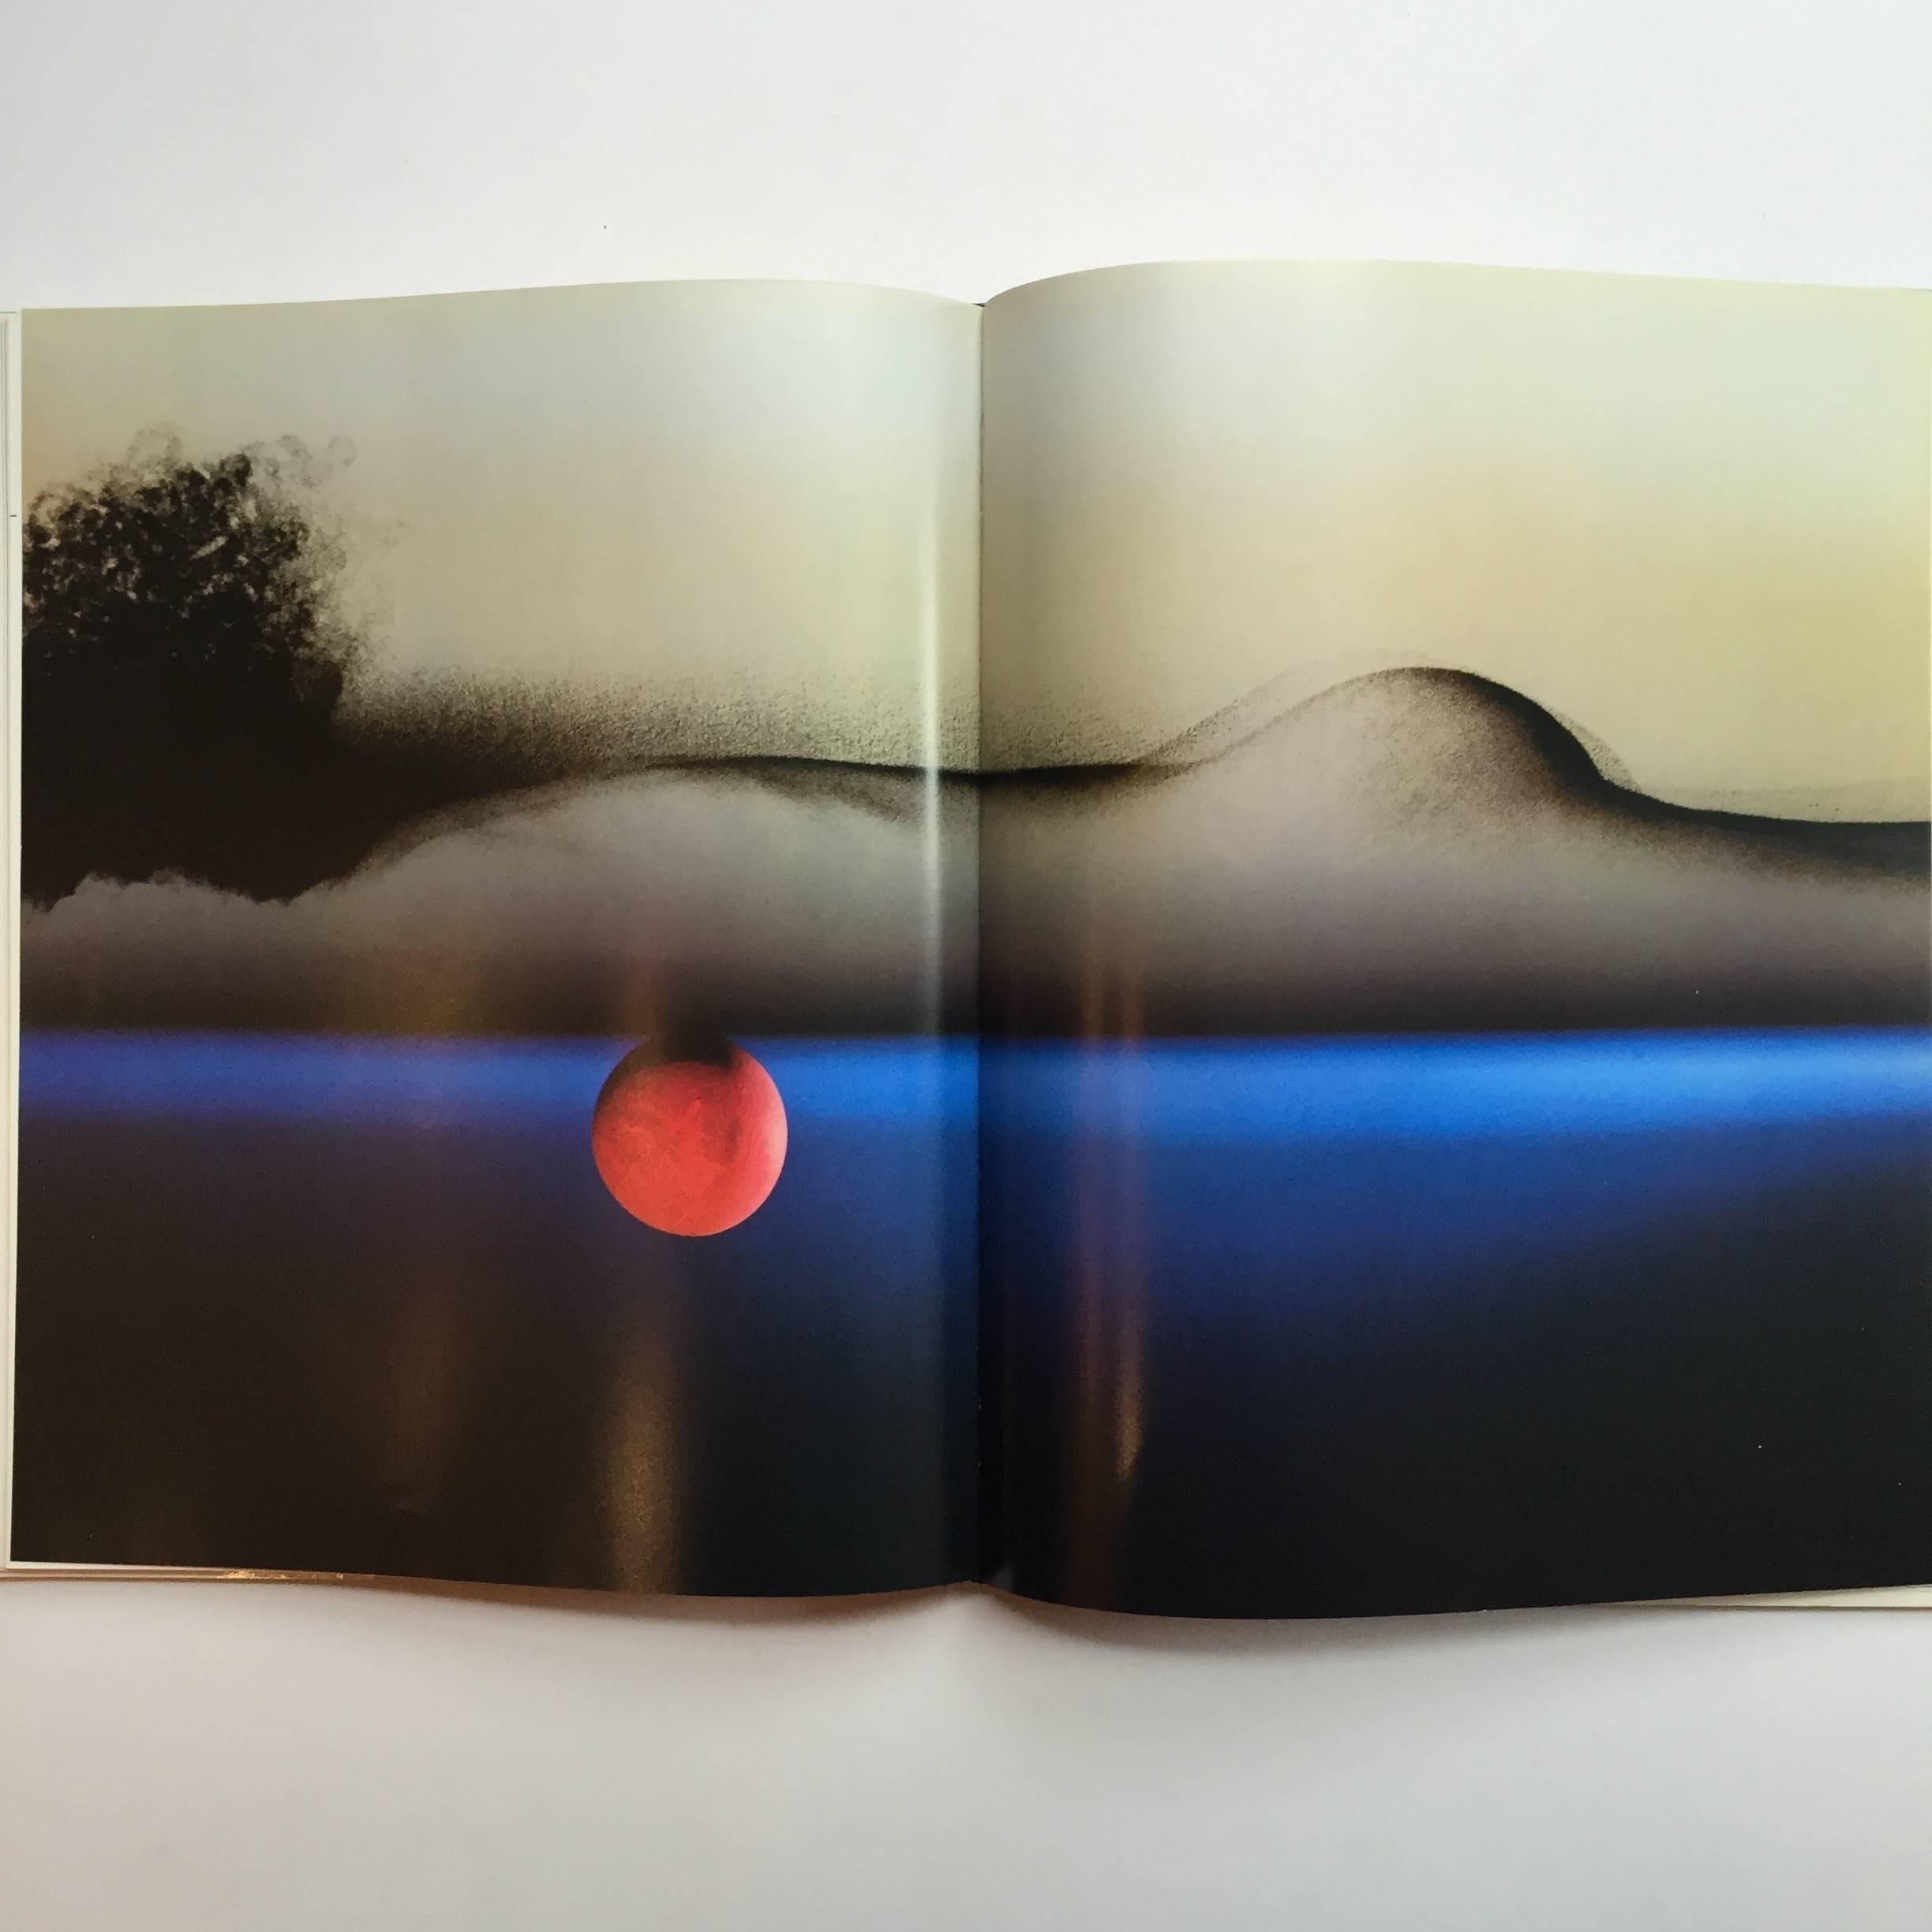 First edition, published by RotoVision SA, 1980

Known for his narrative based photographic studies of the female form, this dream-like book collects together many of Haskins graphic works, created through the overlapping and combination of